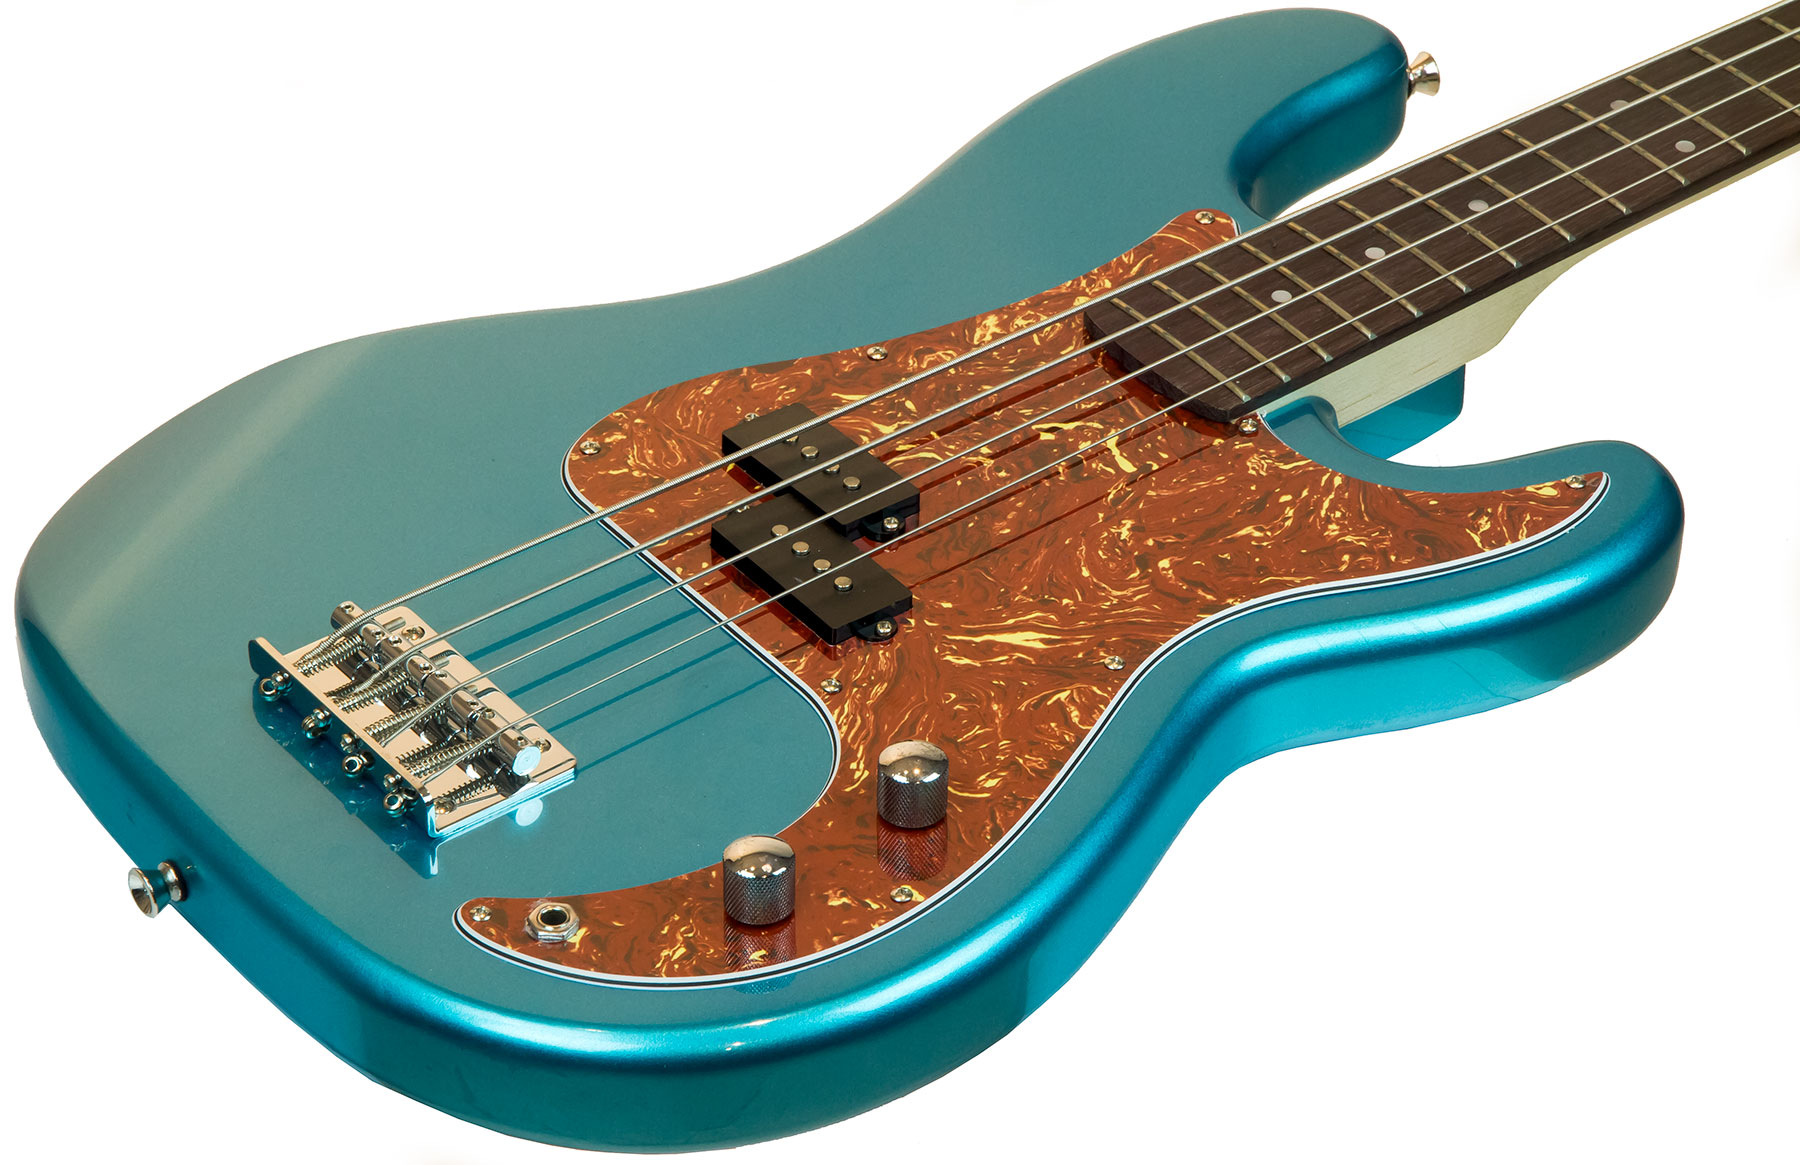 Eastone Prb Pur - Metallic Light Blue - Solid body electric bass - Variation 1